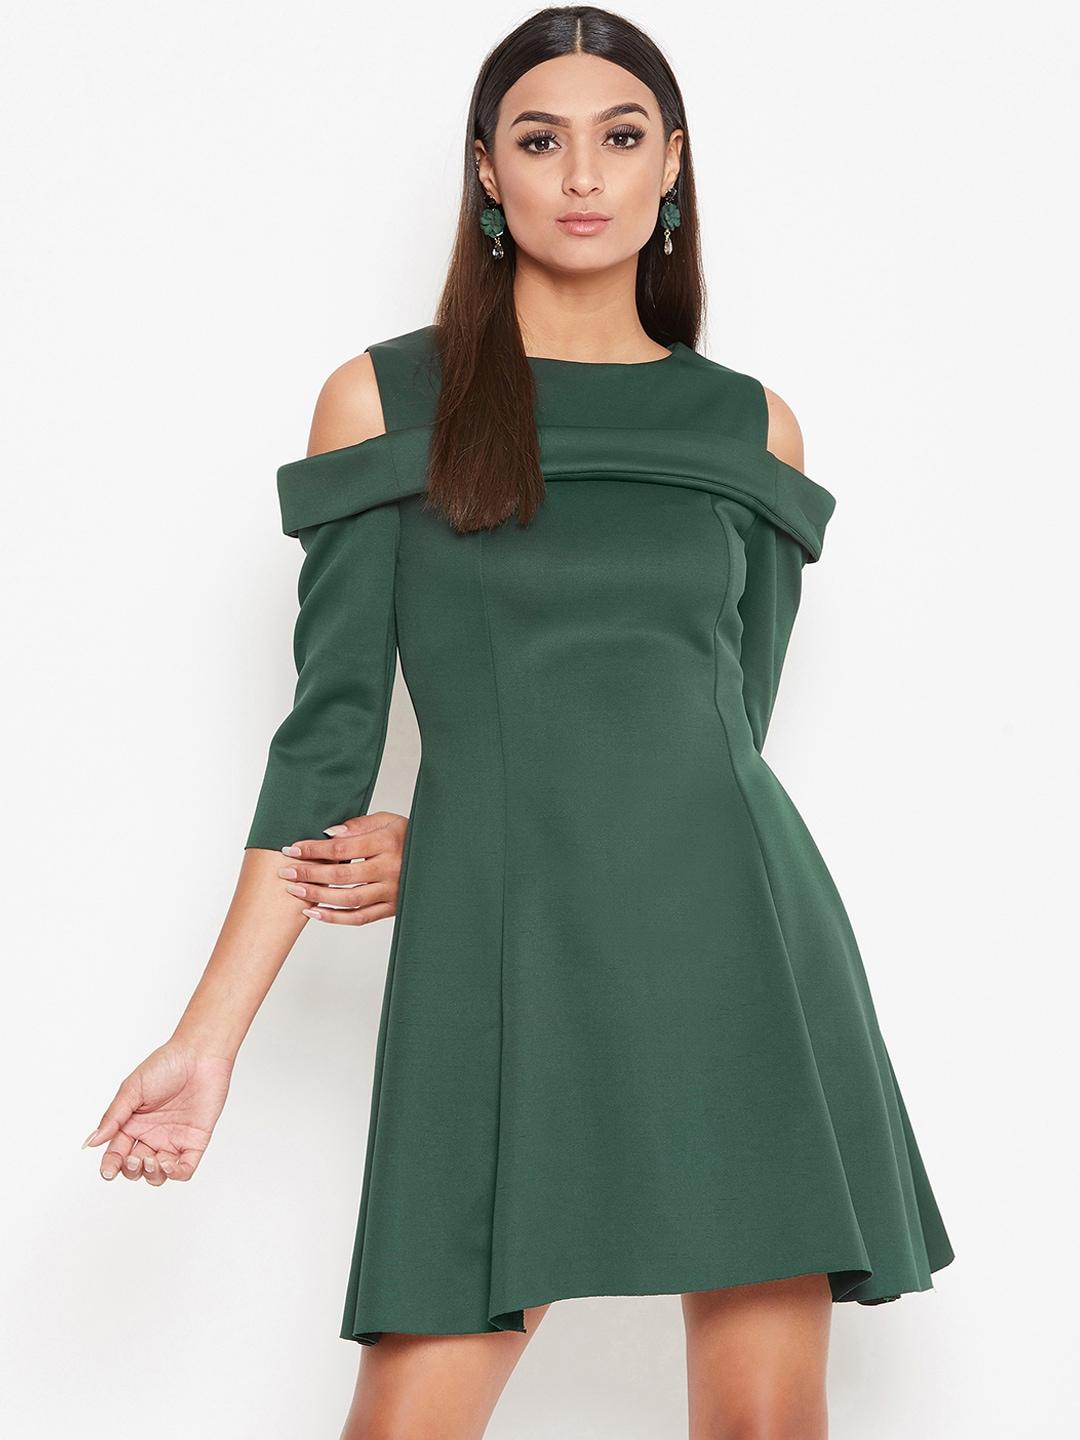 la-zoire-women-green-solid-fit-and-flare-dress